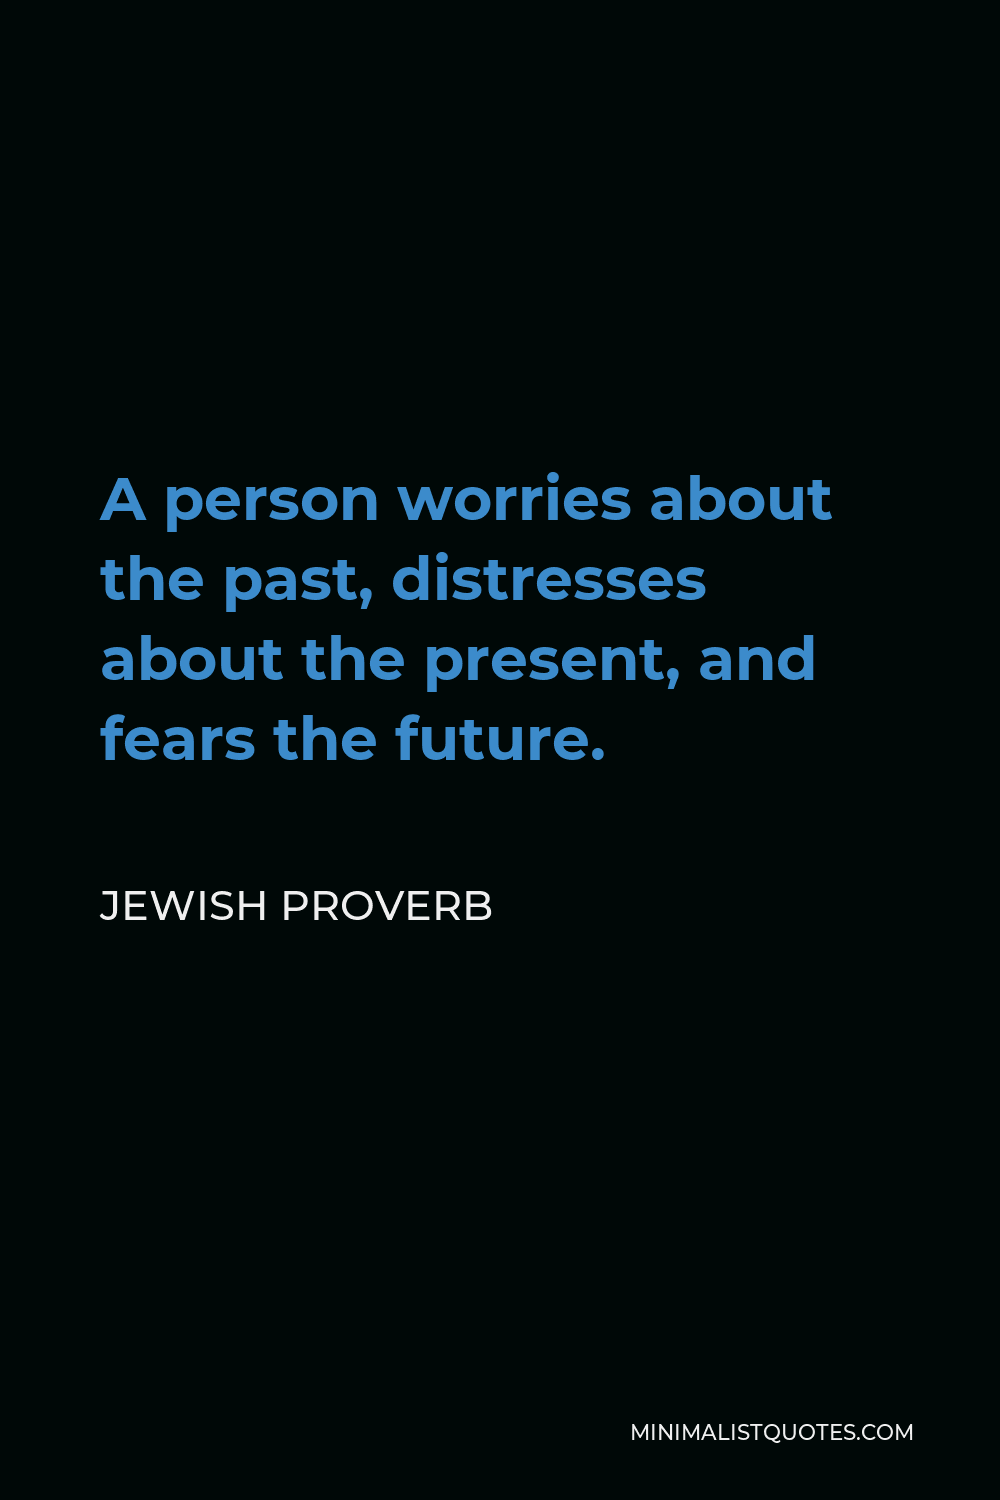 Jewish Proverb Quote - A person worries about the past, distresses about the present, and fears the future.